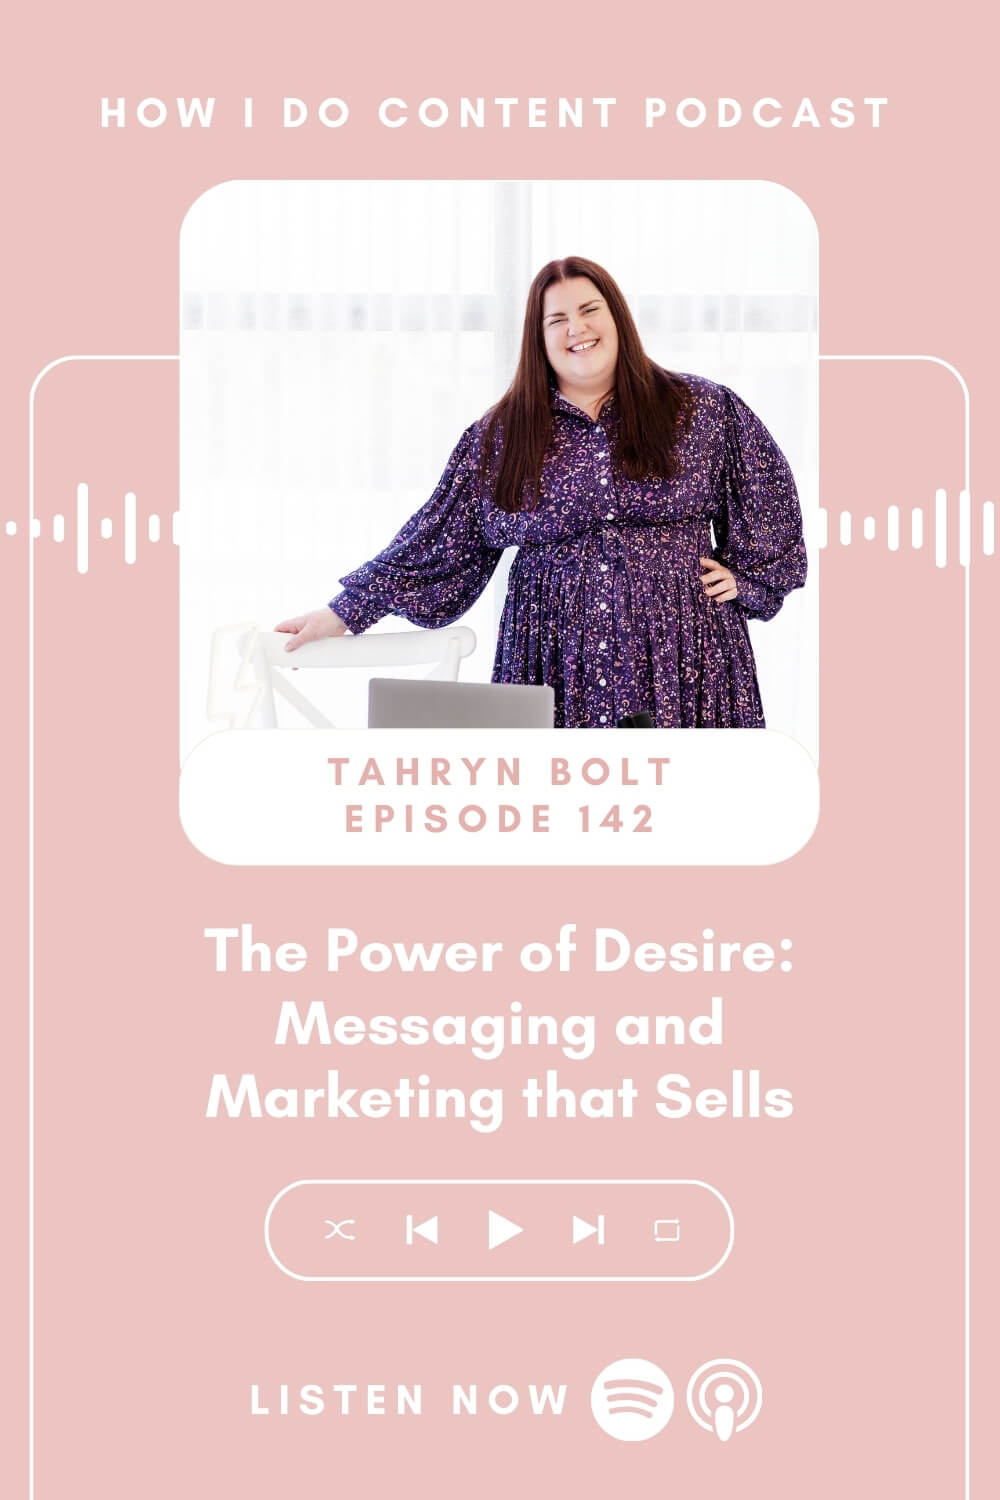 The Power of Desire: Messaging and Marketing that Sells